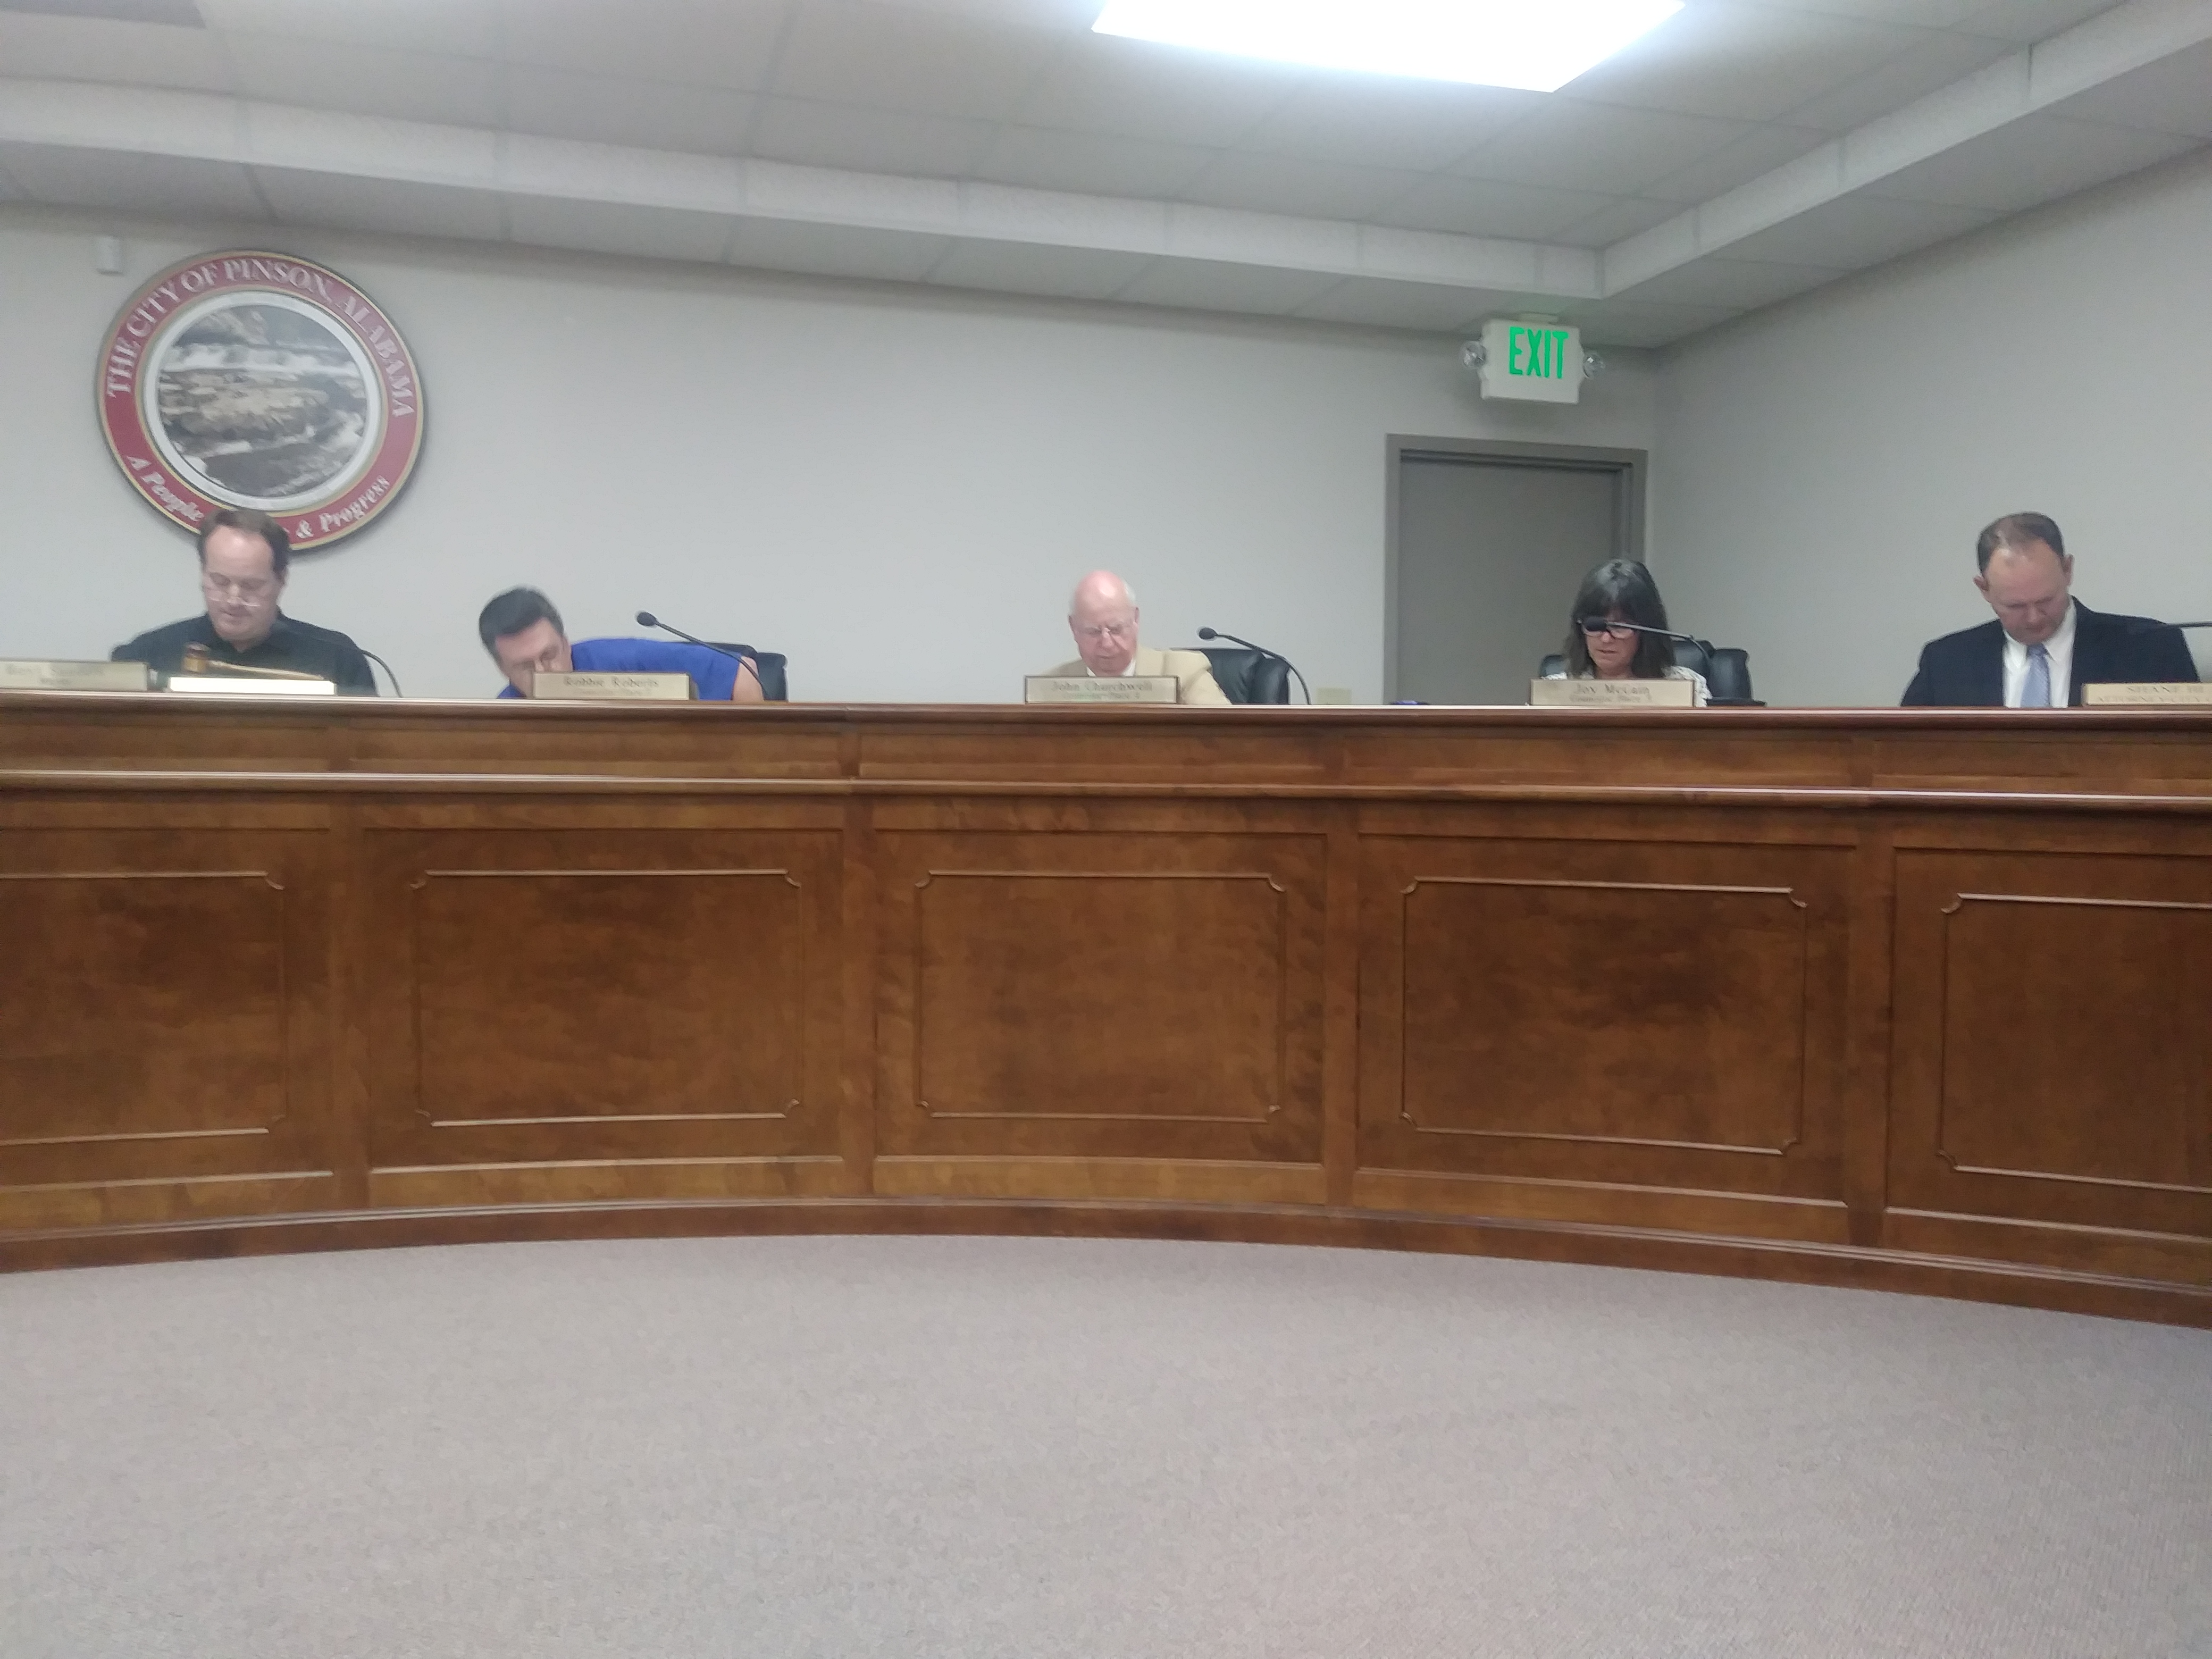 Council adopts resolution recognizing Pinson Valley High School basketball